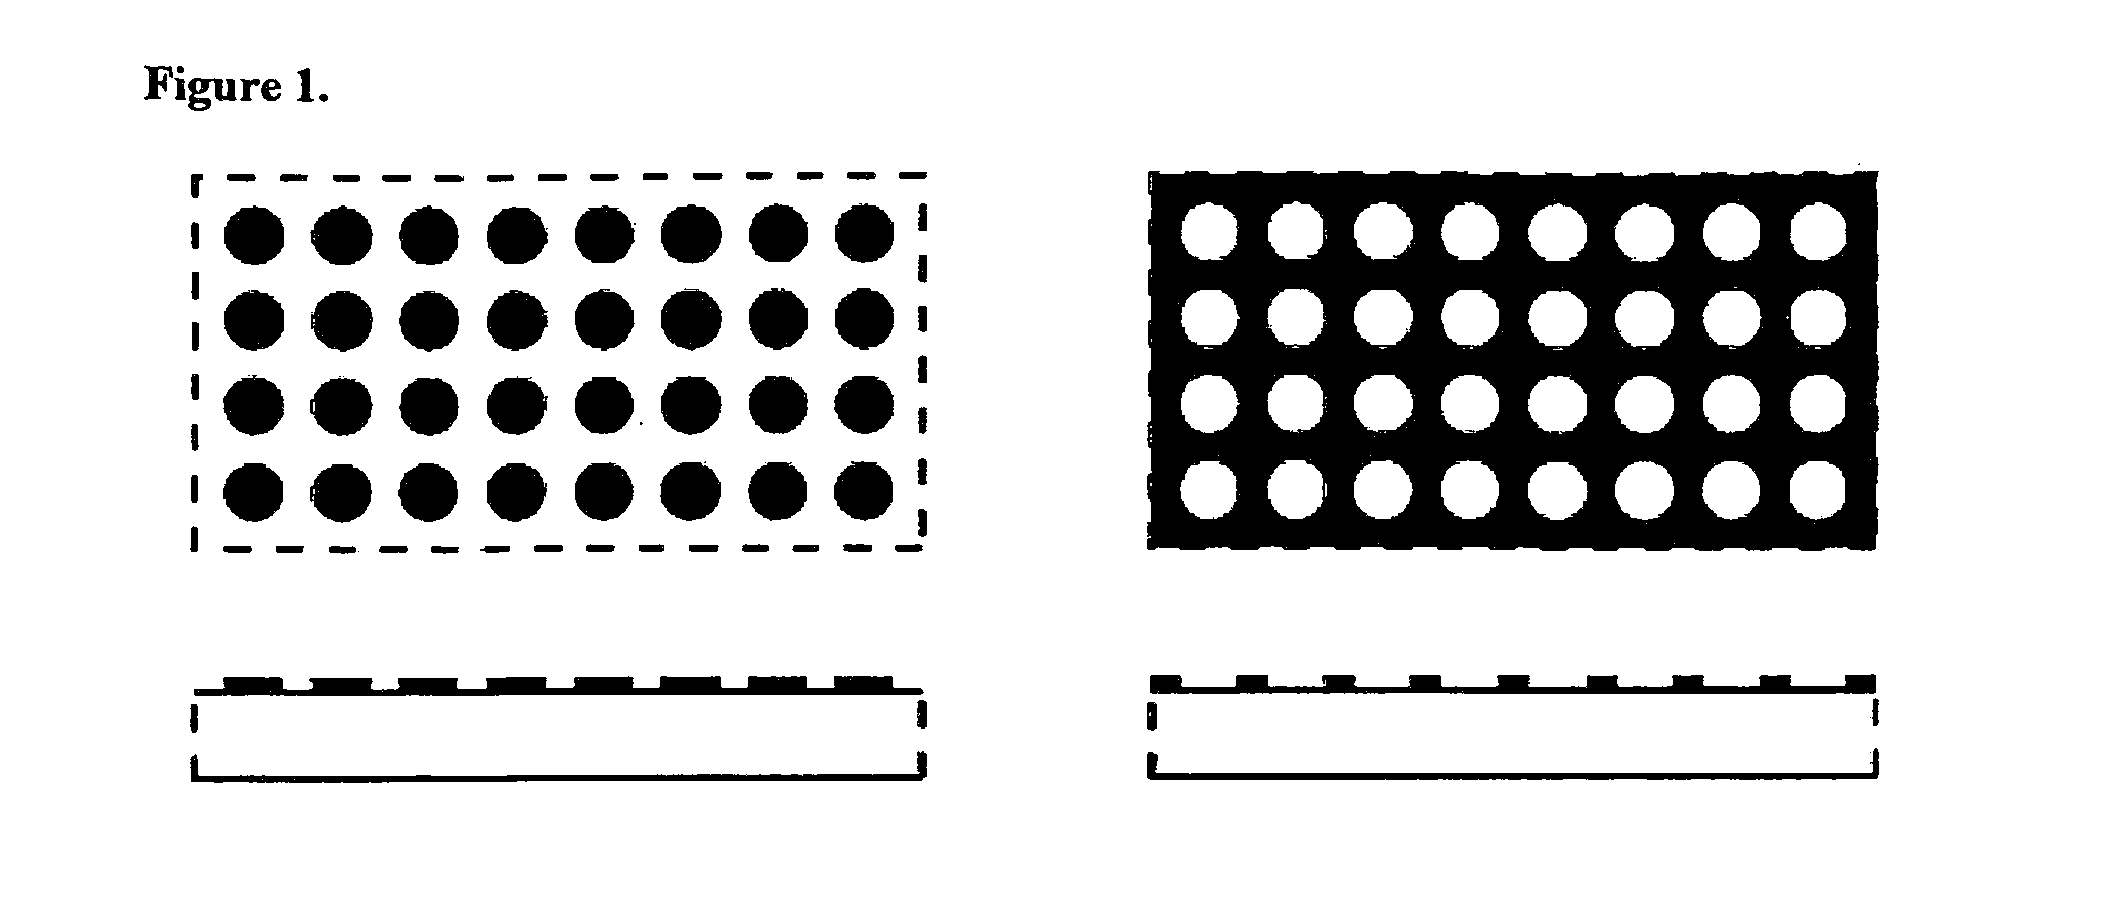 Methods of making and using microarrays suitable for high-throughput detection